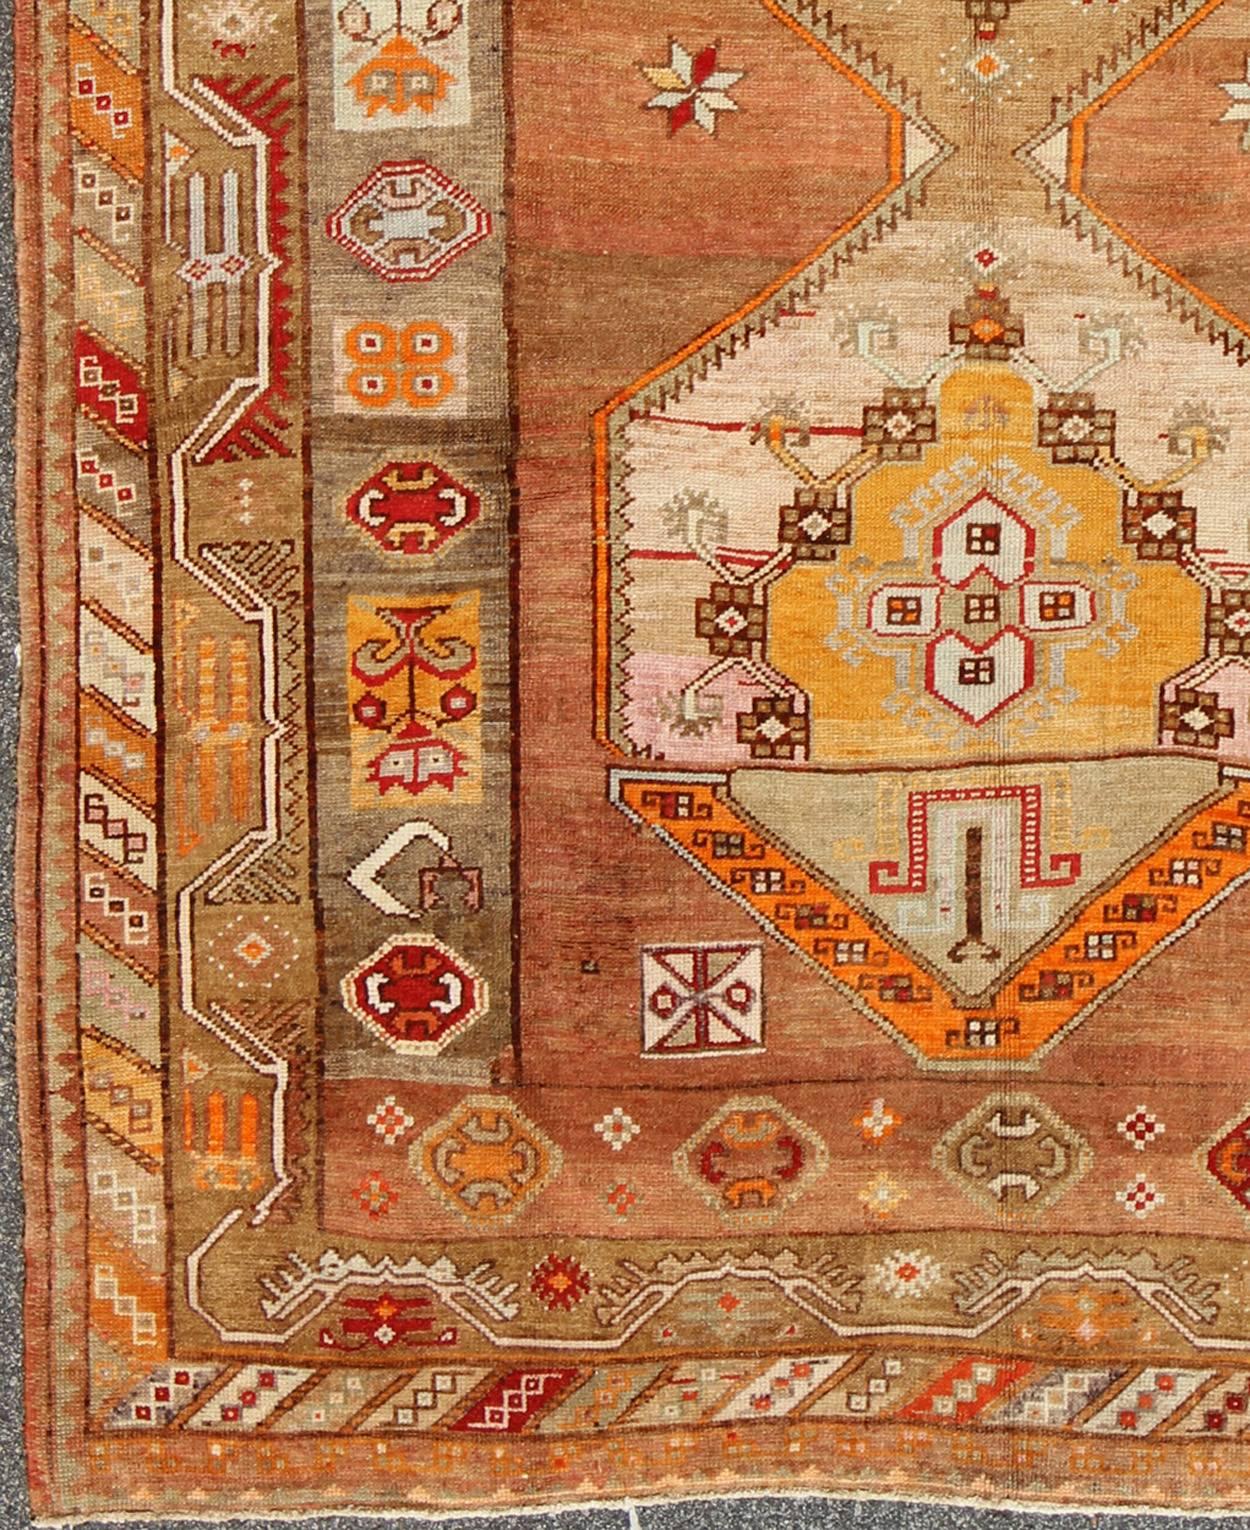 This beautiful Turkish Oushak rug, handwoven in Turkey, features an exquisite geometric design with two large medallions. The medium tone colors include an earthy palette with pops of orange, blue, pink, green, red camel, yellow and coral. An ornate